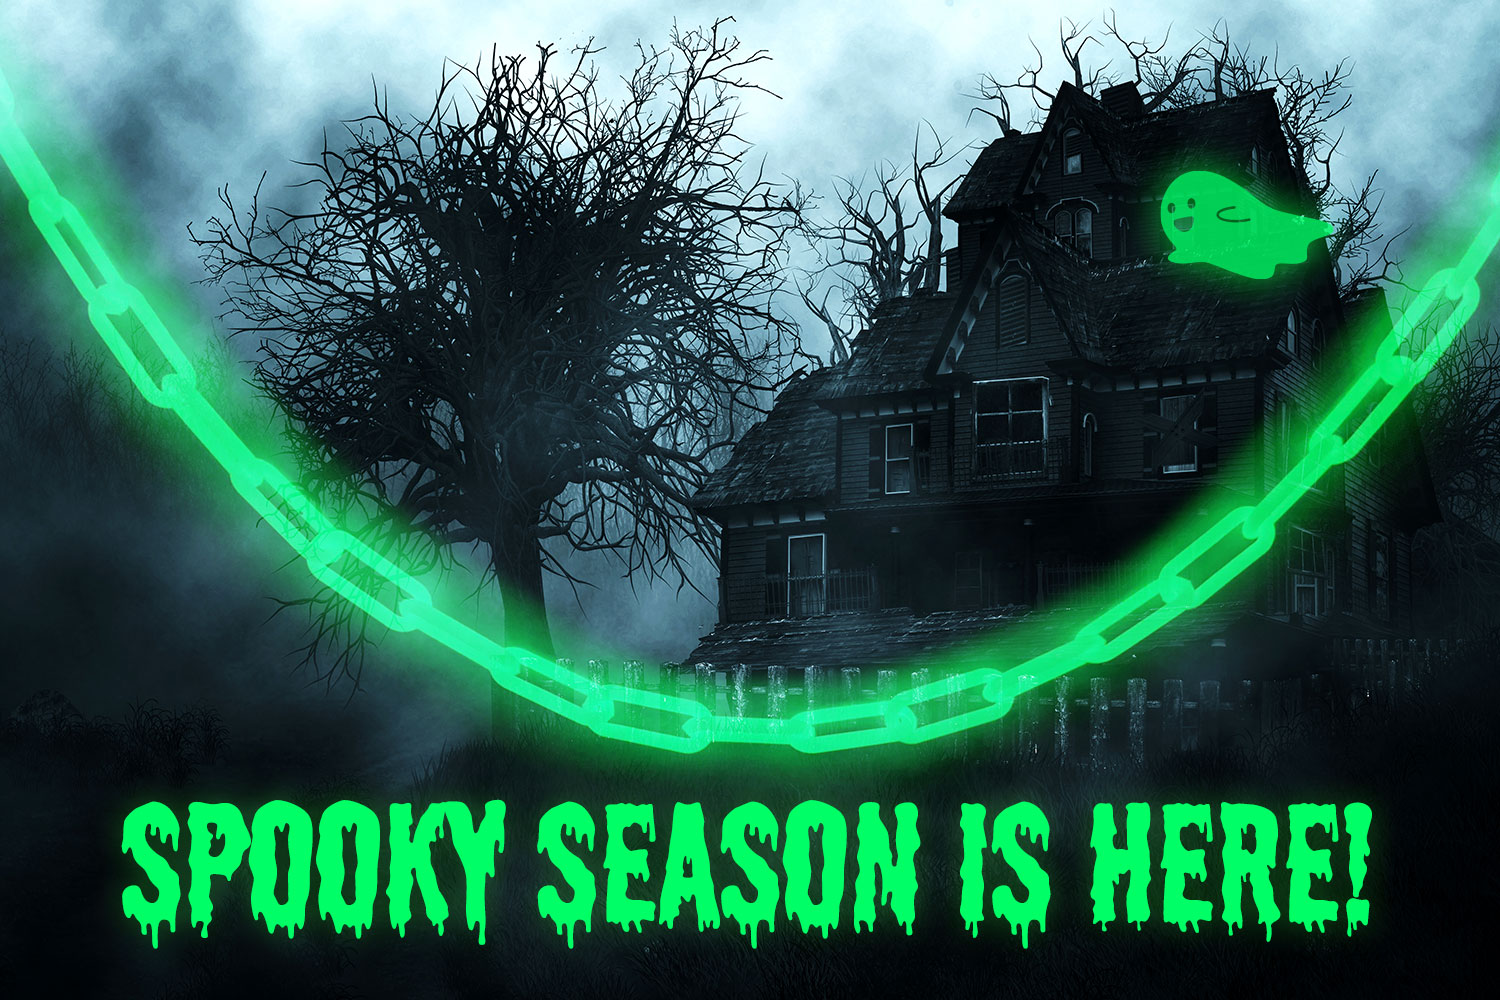 Have a Safe Spooky Season with PERMALIGHT®